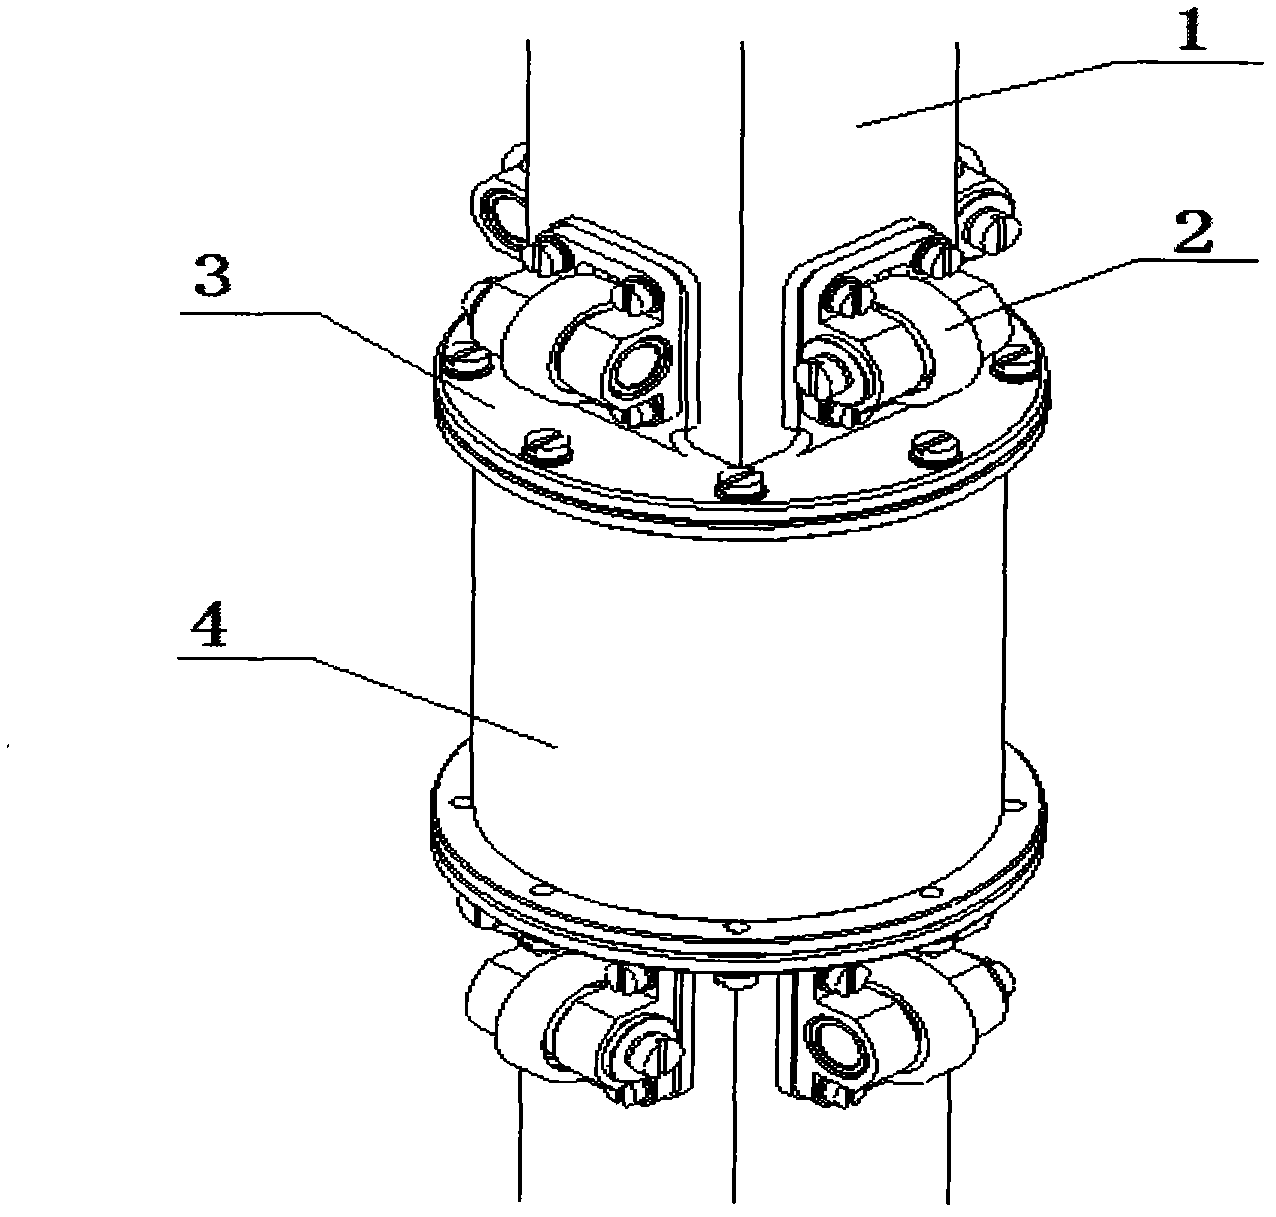 A rolling bearing linear guide device for a lunar rover single-wheel bench test device